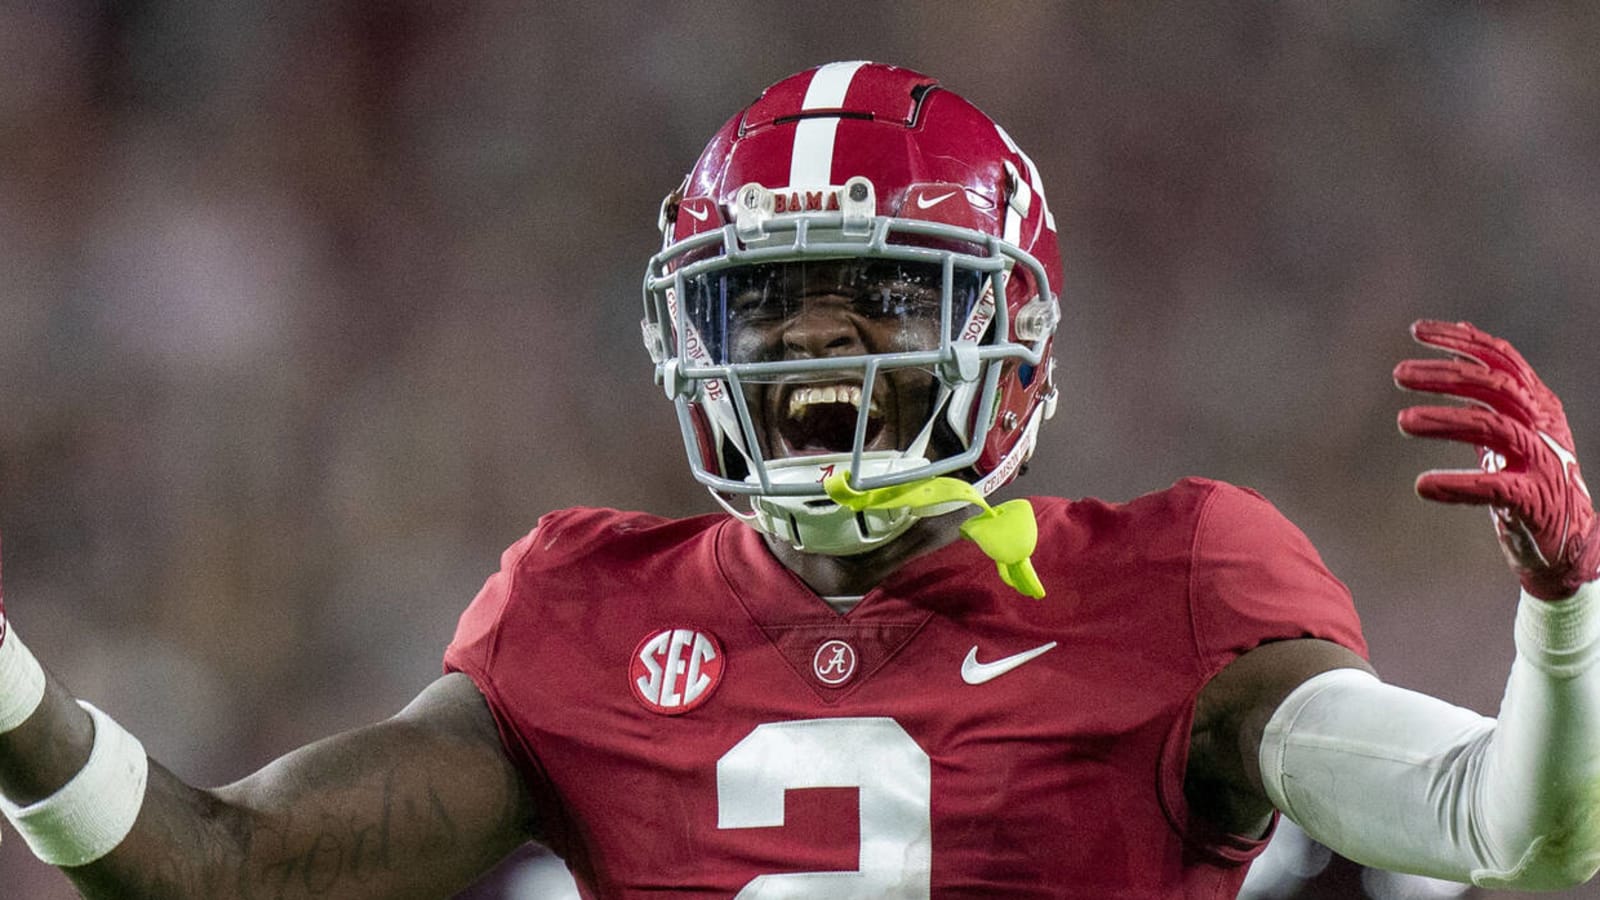 Alabama’s Hellams was furious with teammate for blowing shutout